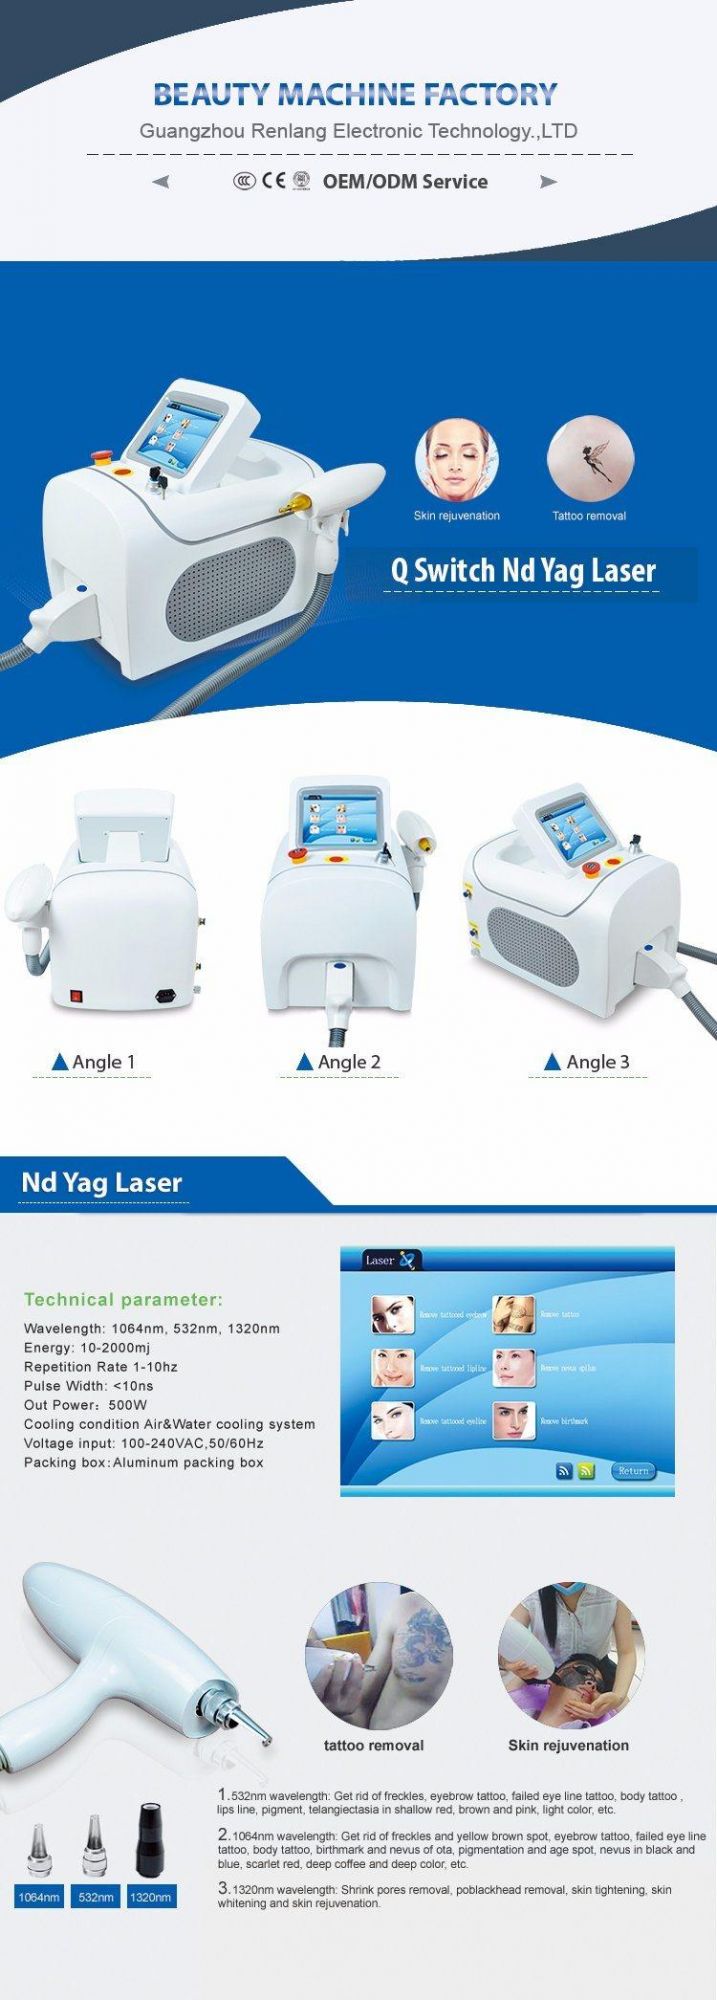 2000mj ND YAG Laser Eyebrow Laser Tattoo Removal Beauty Equioment